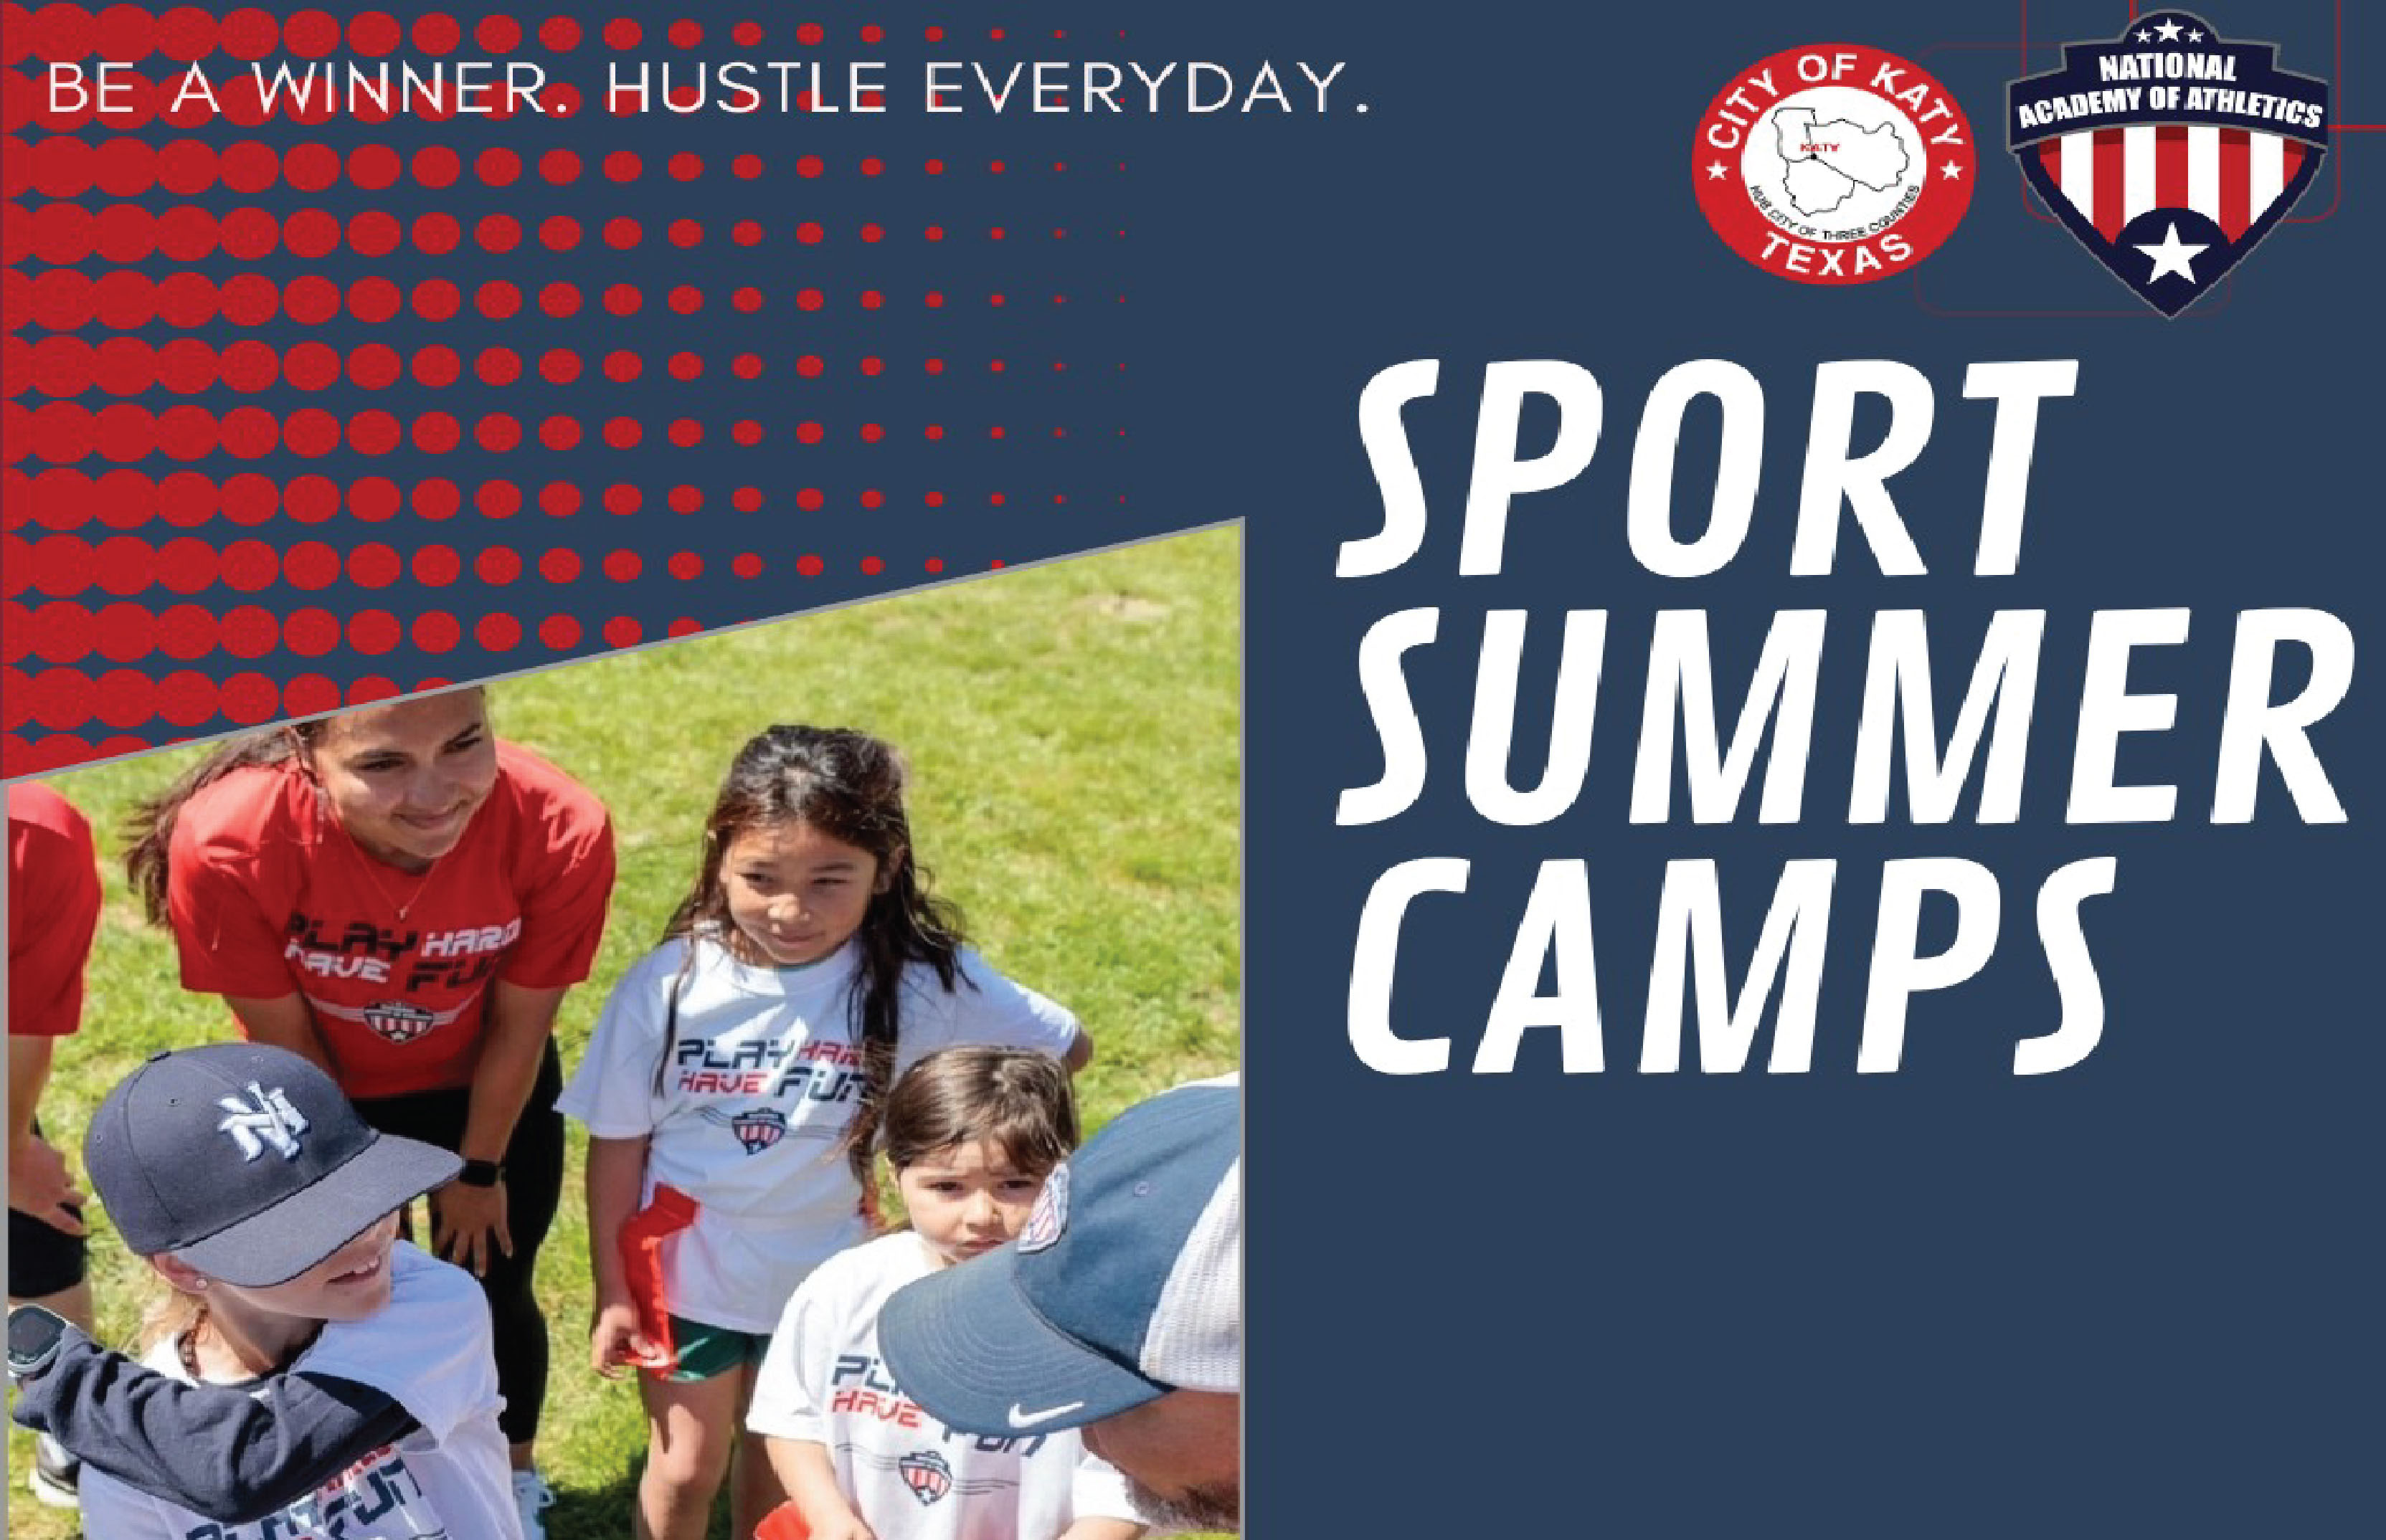 National Academy of Athletics Offering Summer Sports Camps at Katy City Park